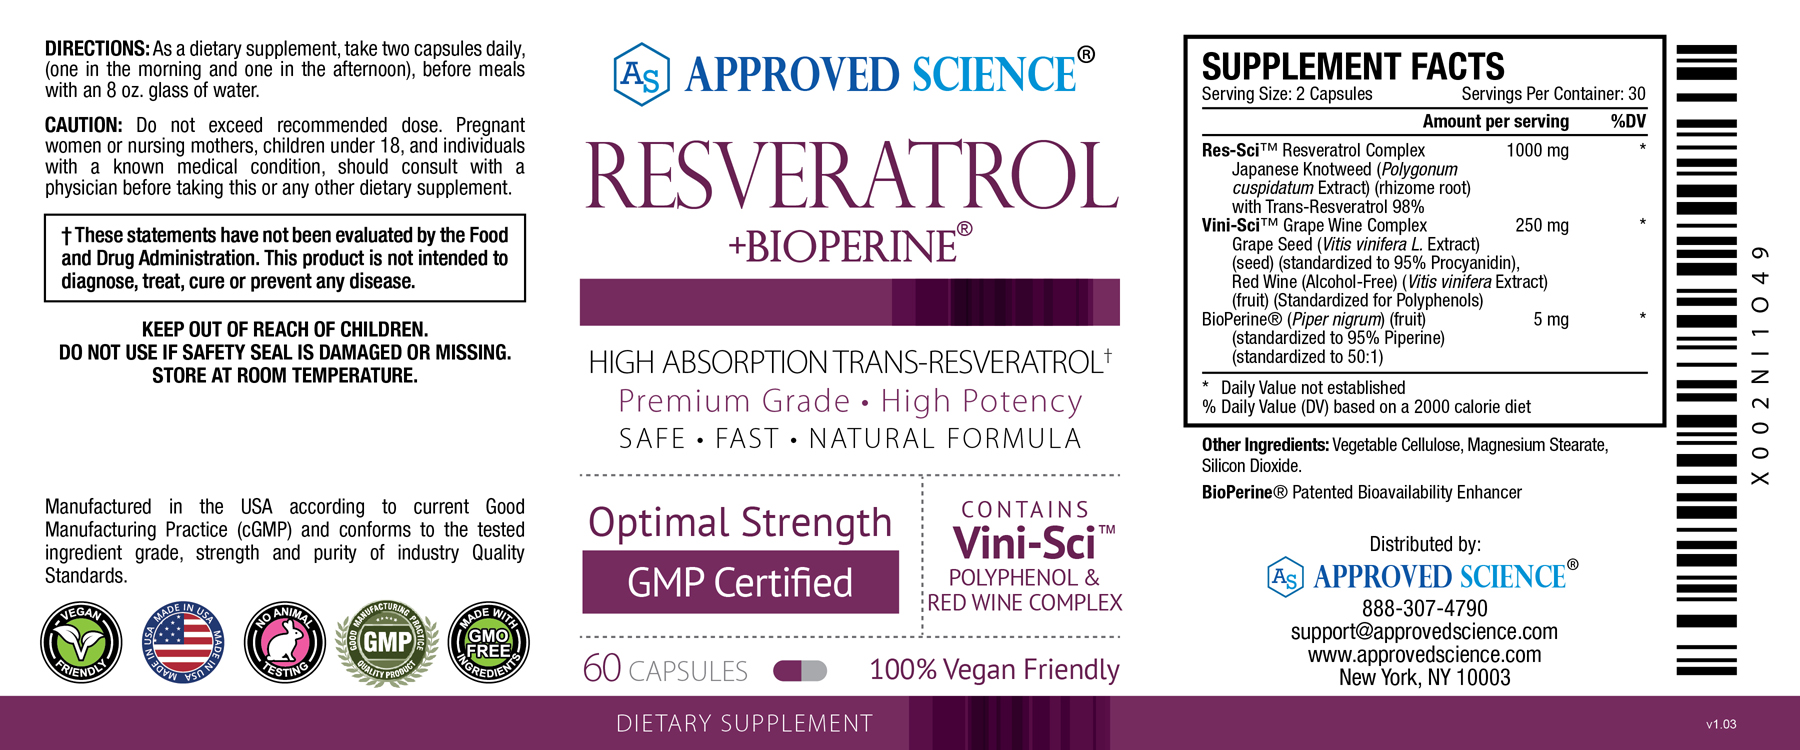 Approved Science® Resveratrol Supplement Facts